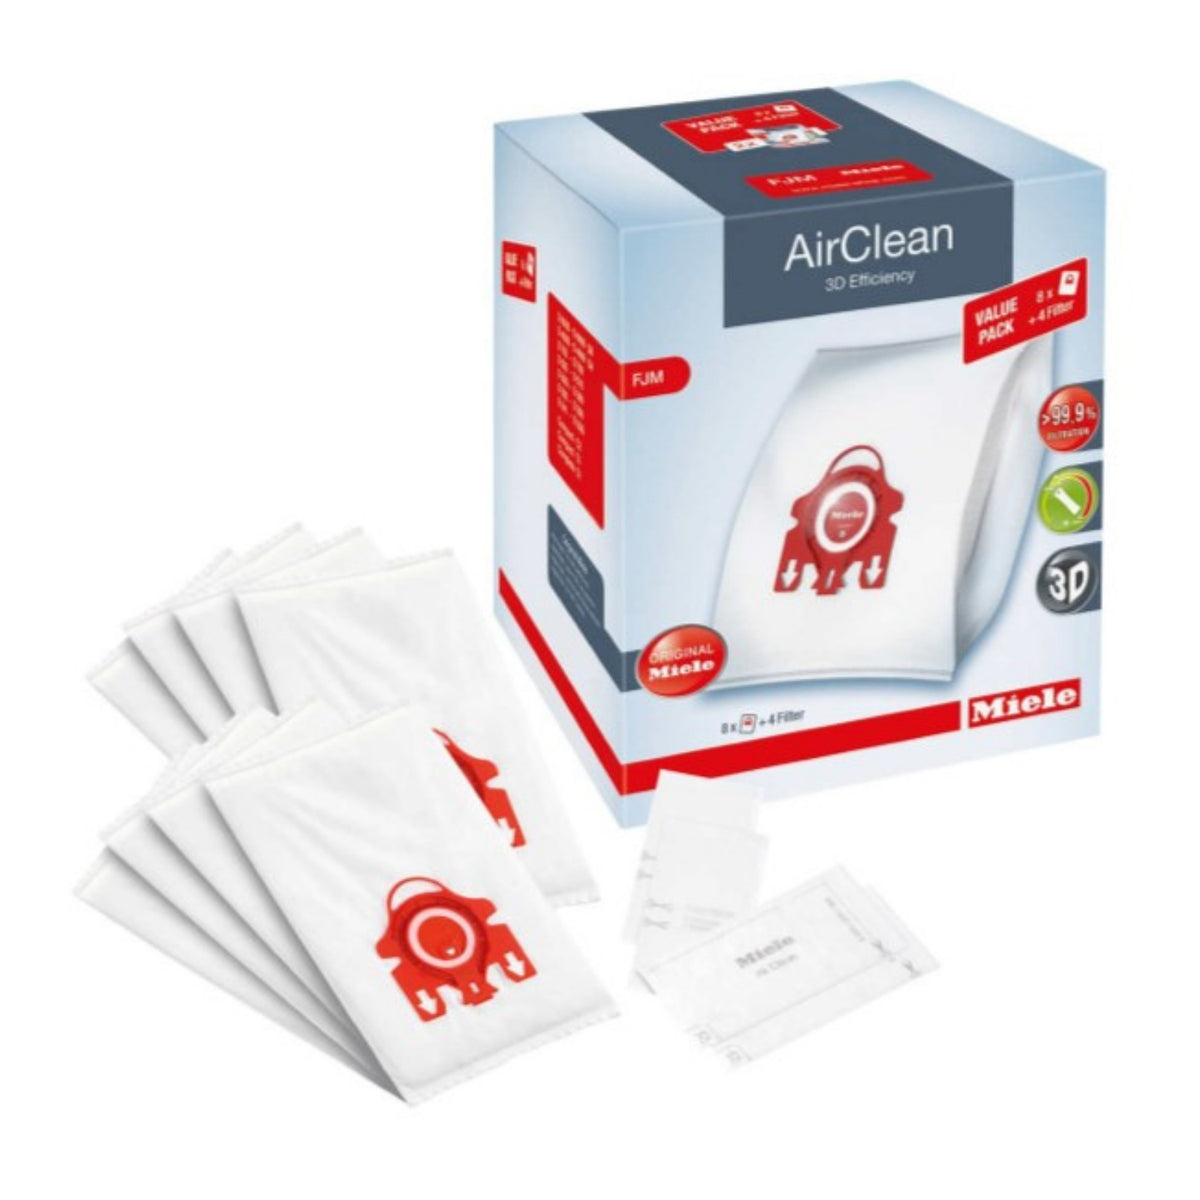 Miele AirClean 3D Efficiency FJM XL-Pack Vacuum Cleaner Bags, 8 Bags and 4  Filters